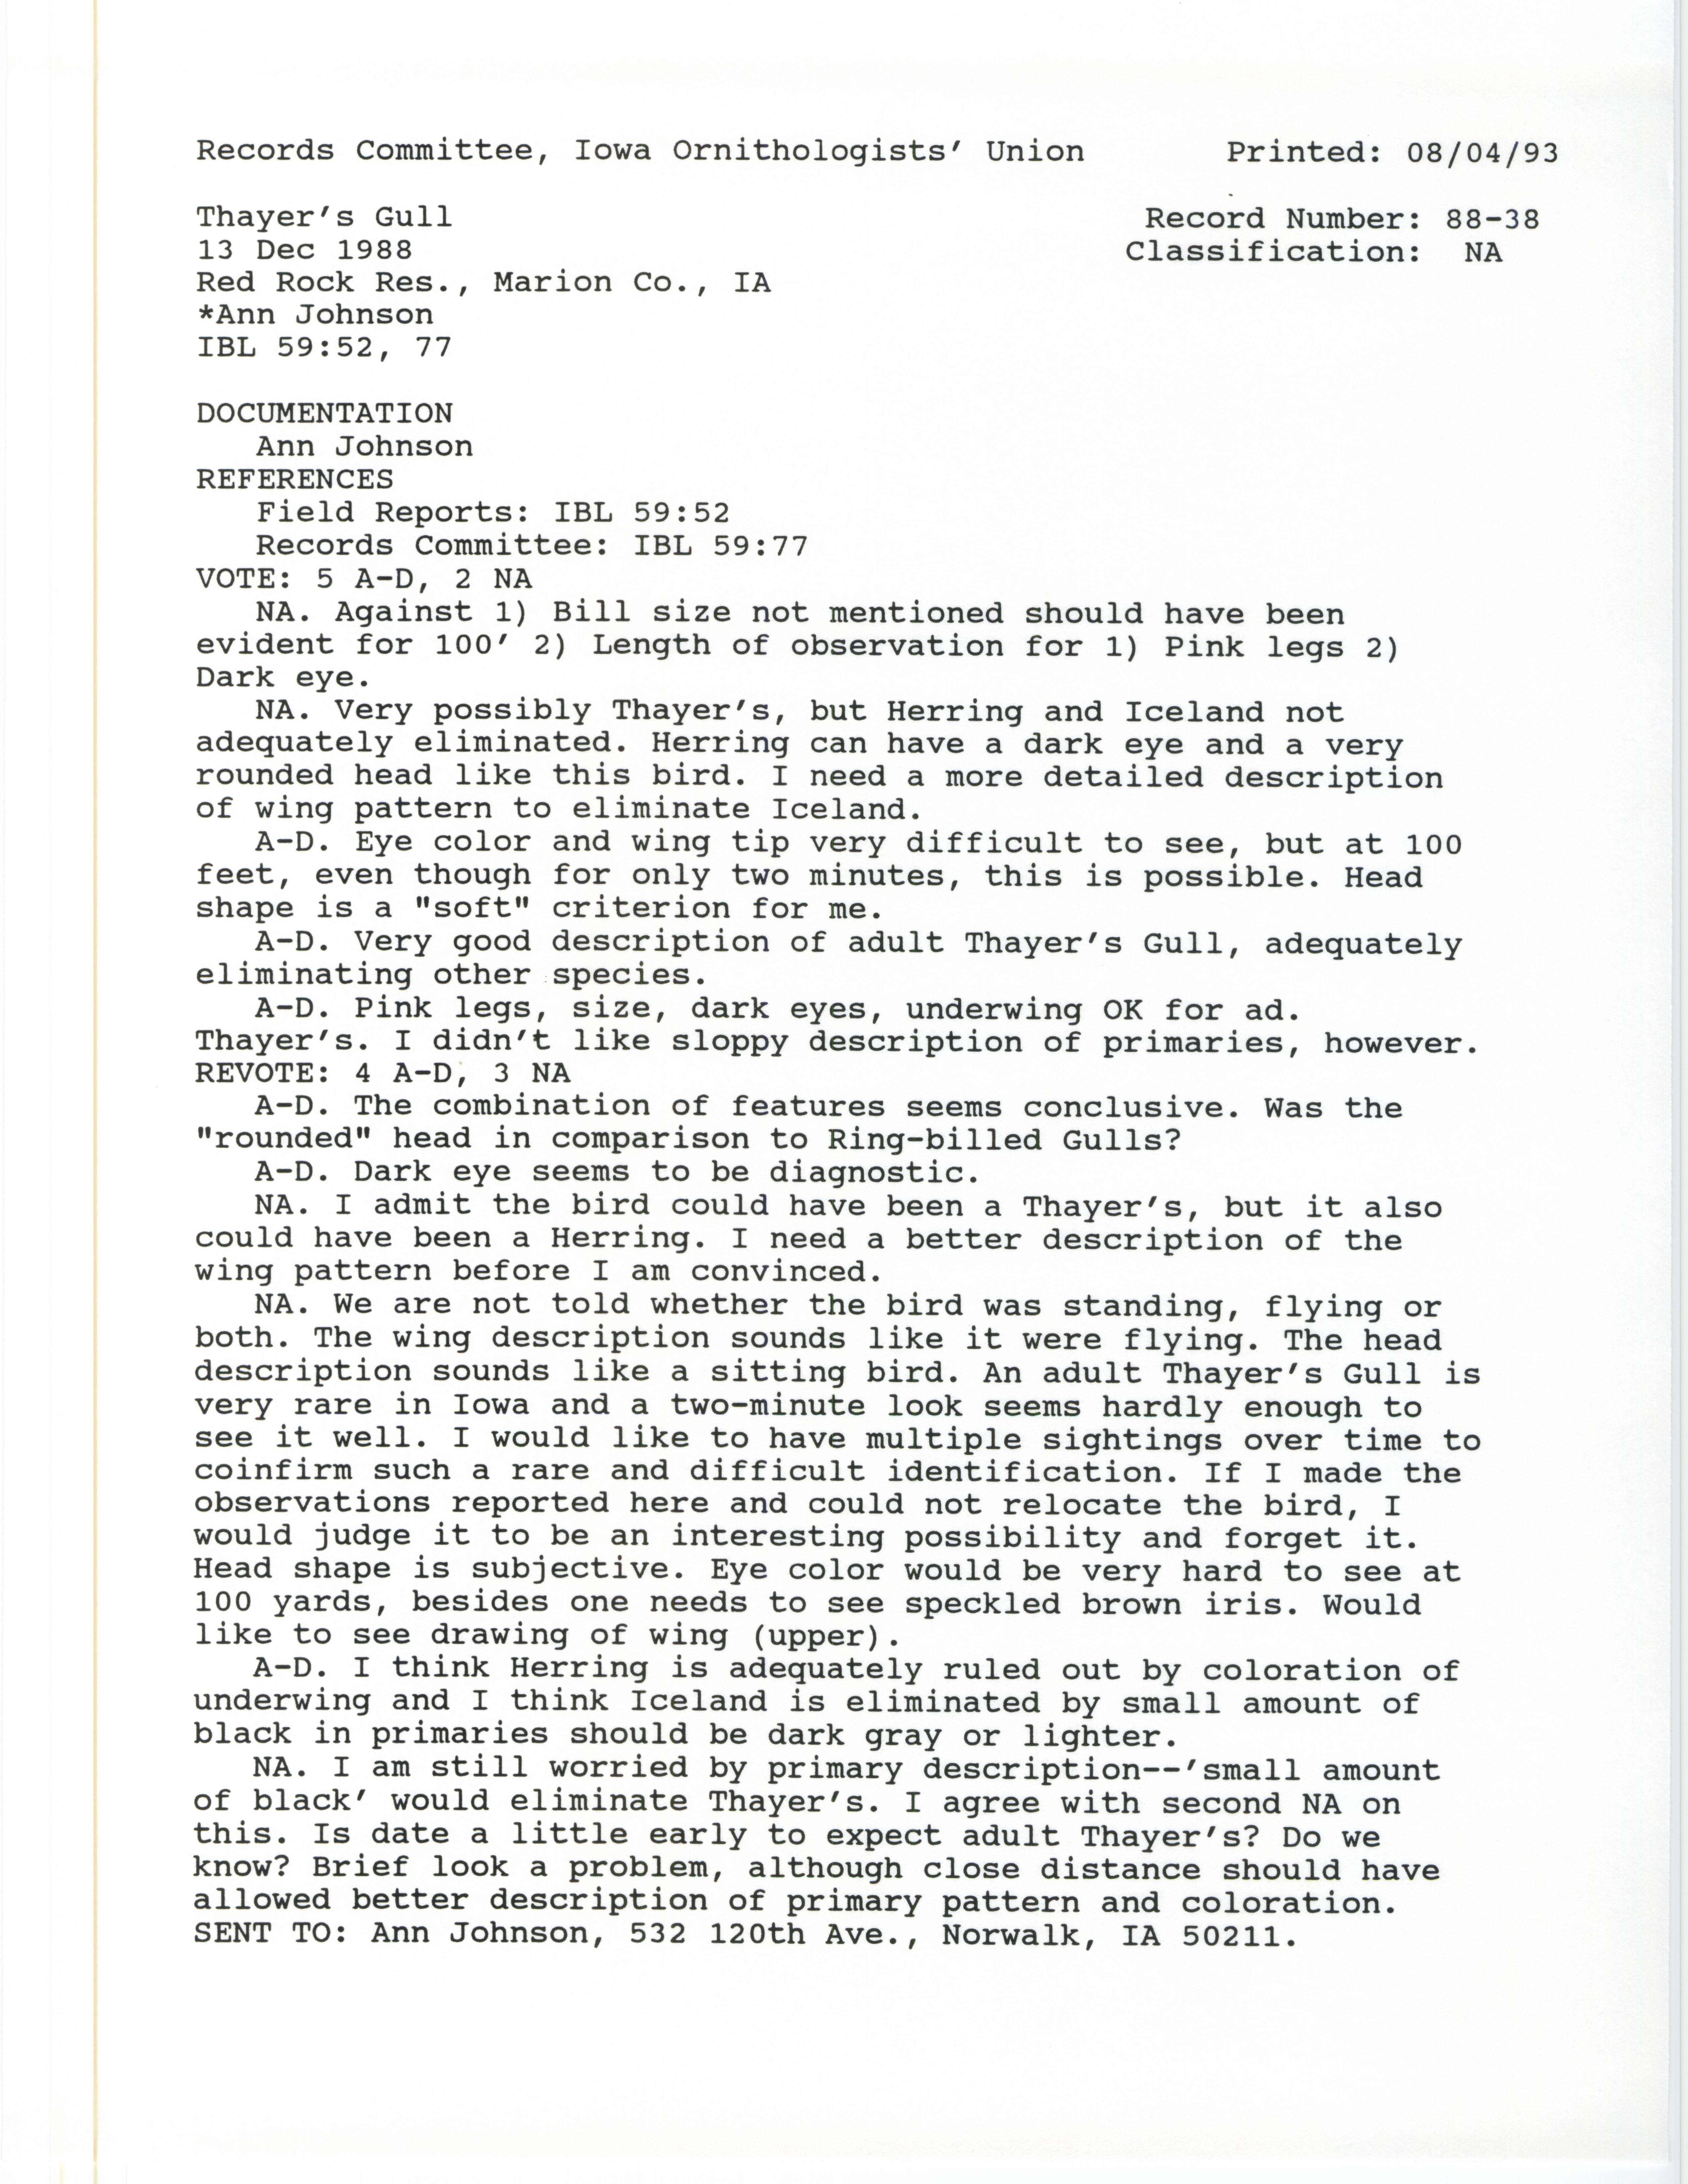 Records Committee review for rare bird sighting of Thayer's Gull at Red Rock Dam, 1988